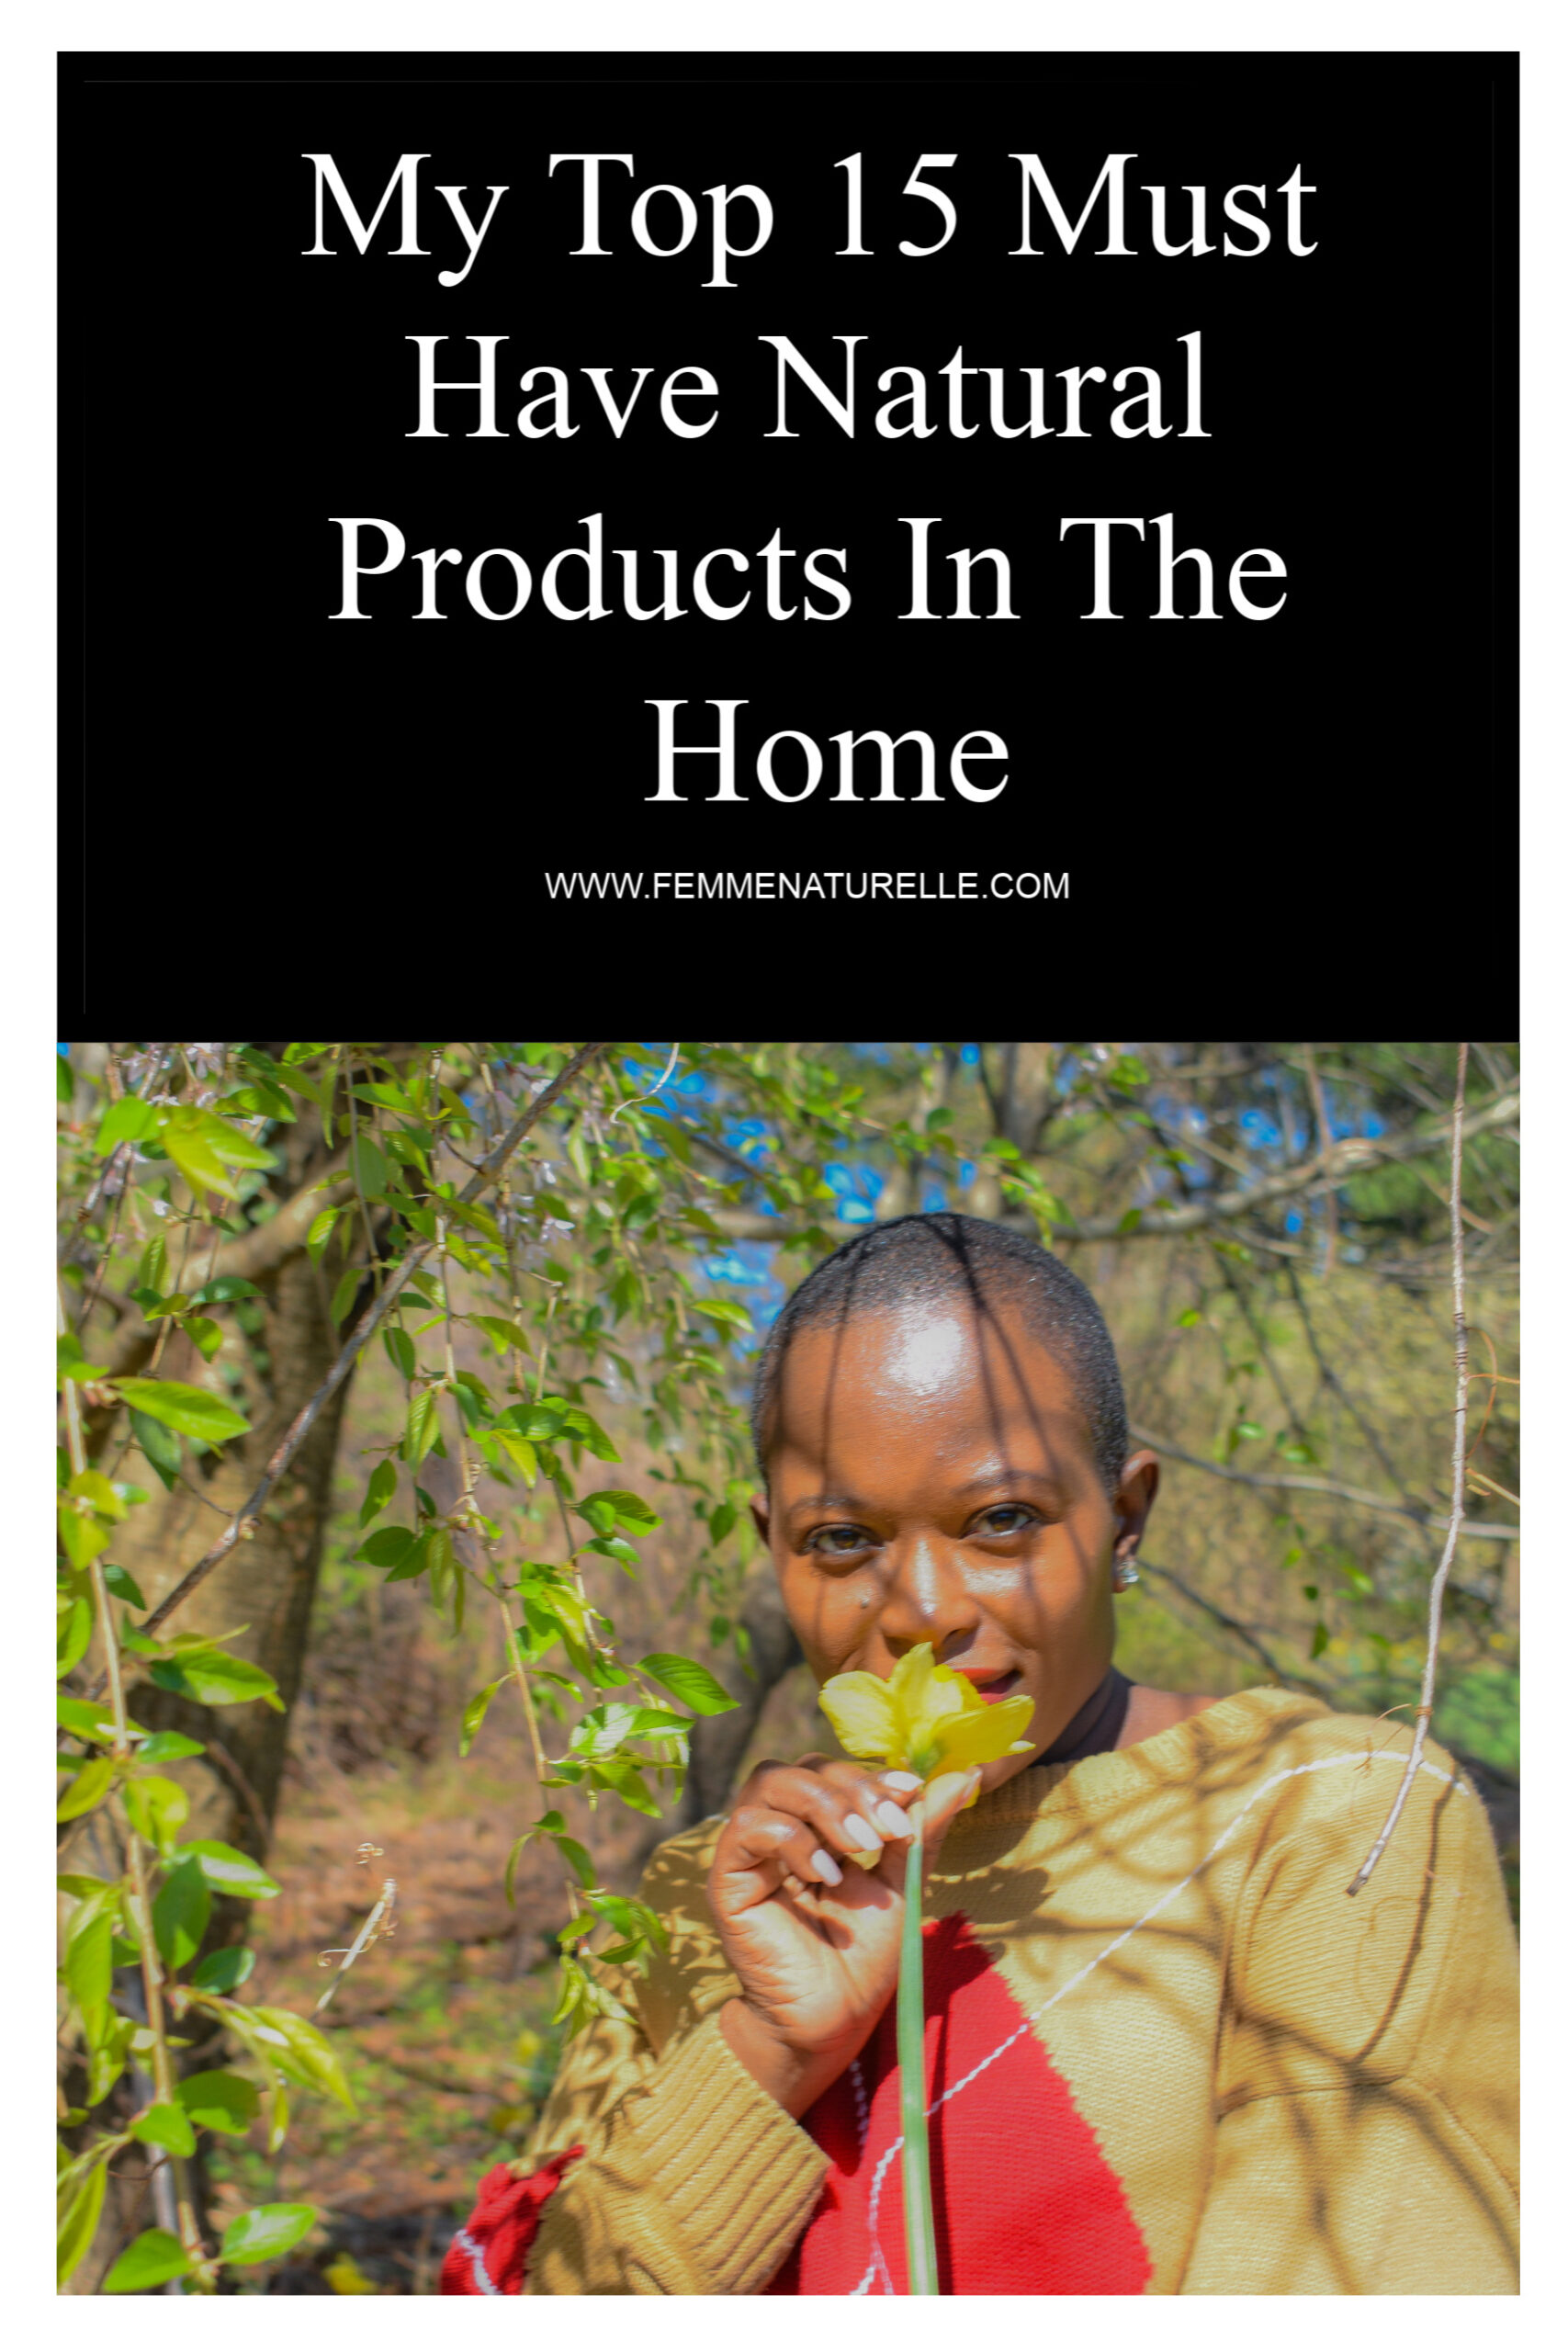 My Top 15 Must Have Natural Products In The Home